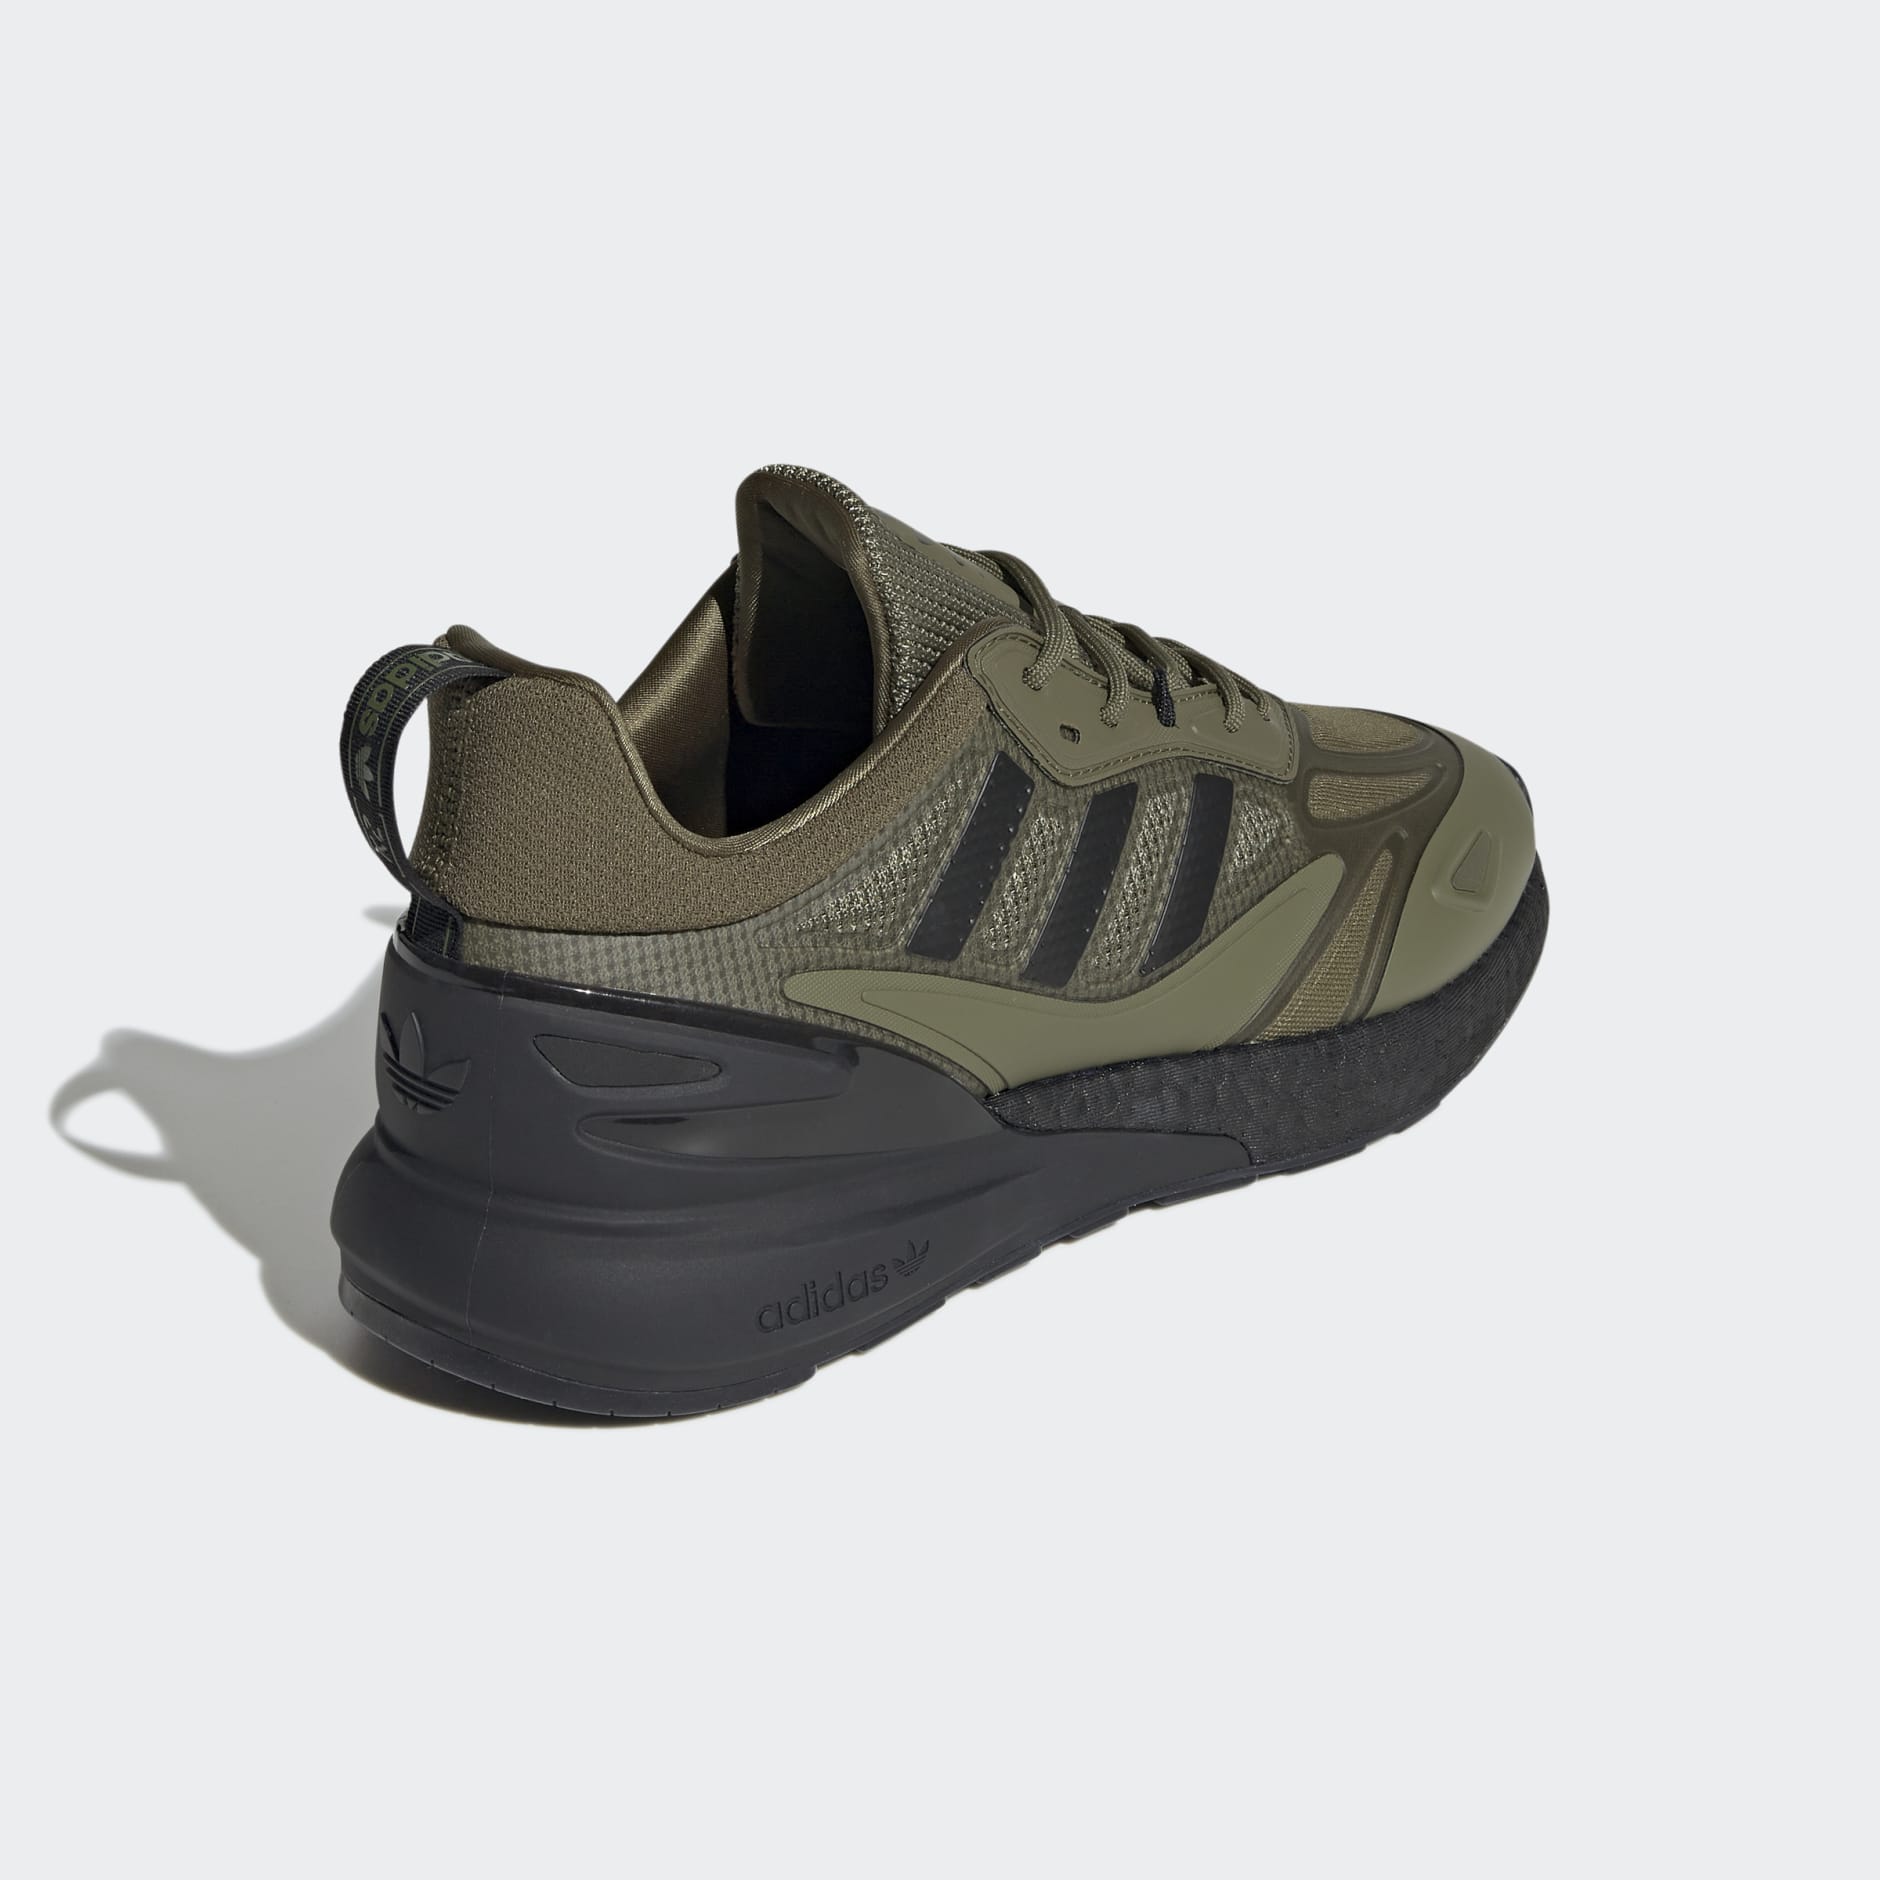 Shoes - ZX 2K BOOST 2.0 Shoes - Green | adidas South Africa